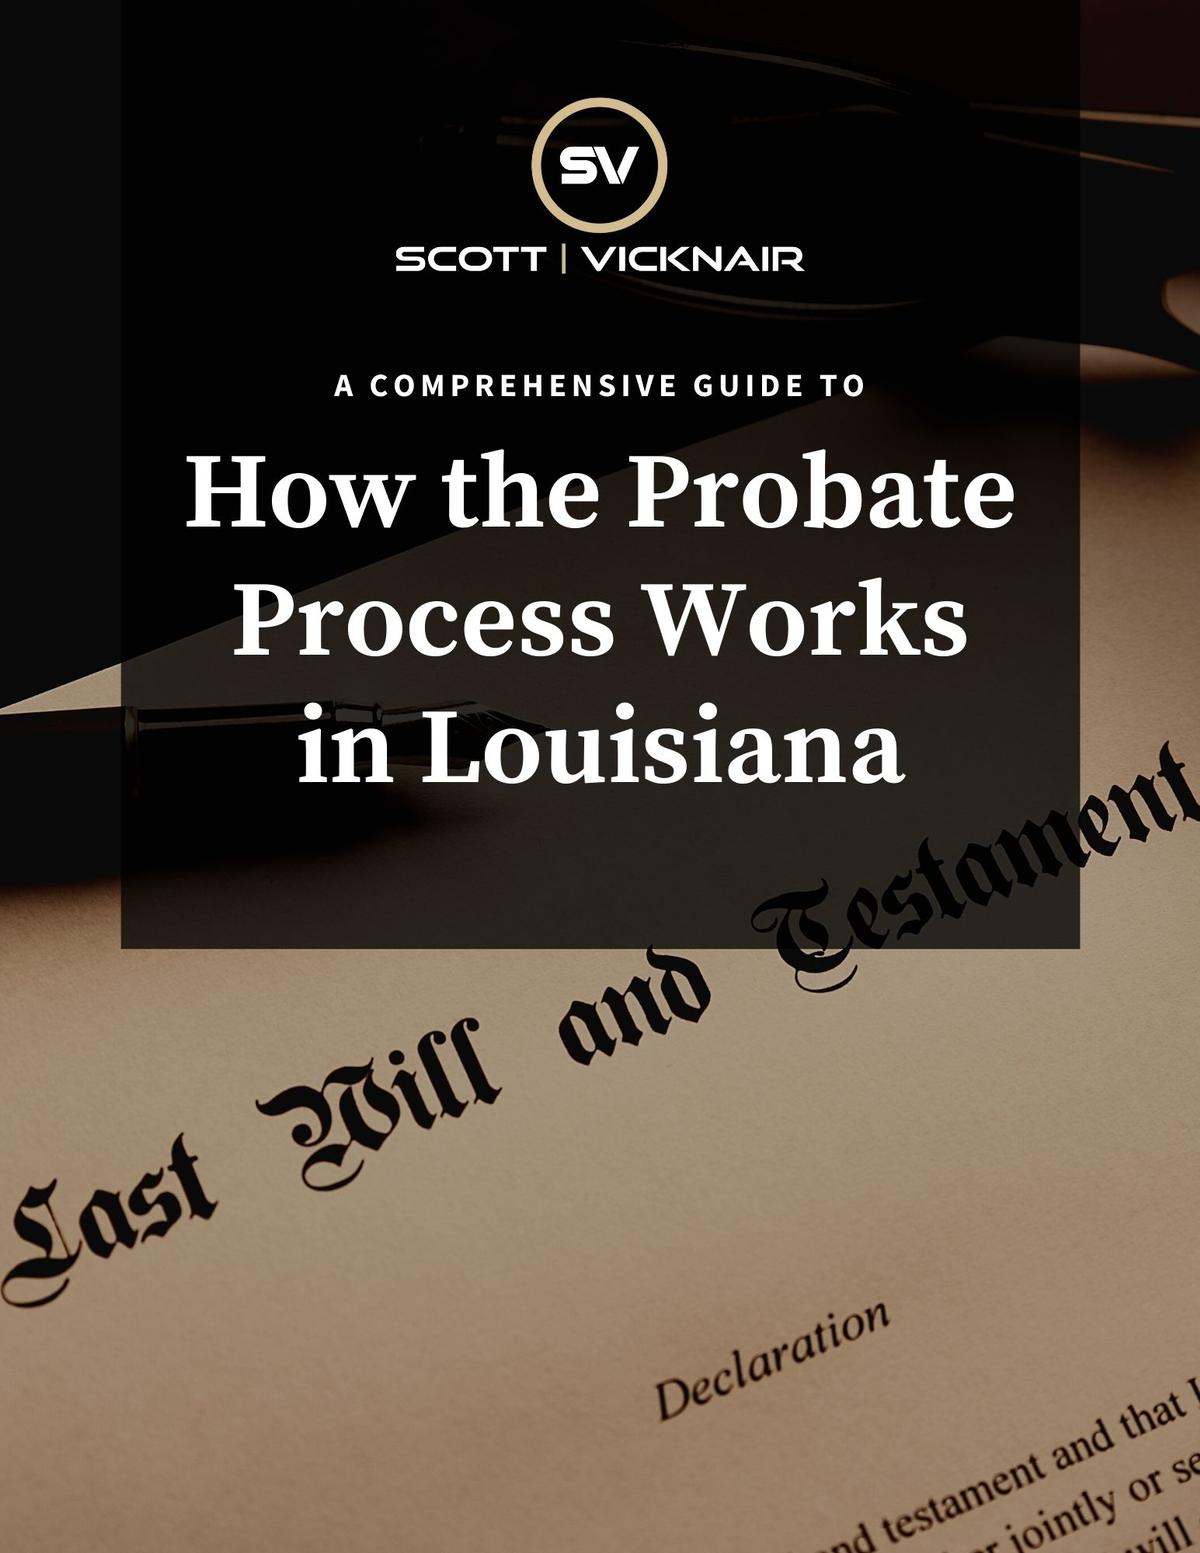 Learn How the Probate Process Works in Louisiana